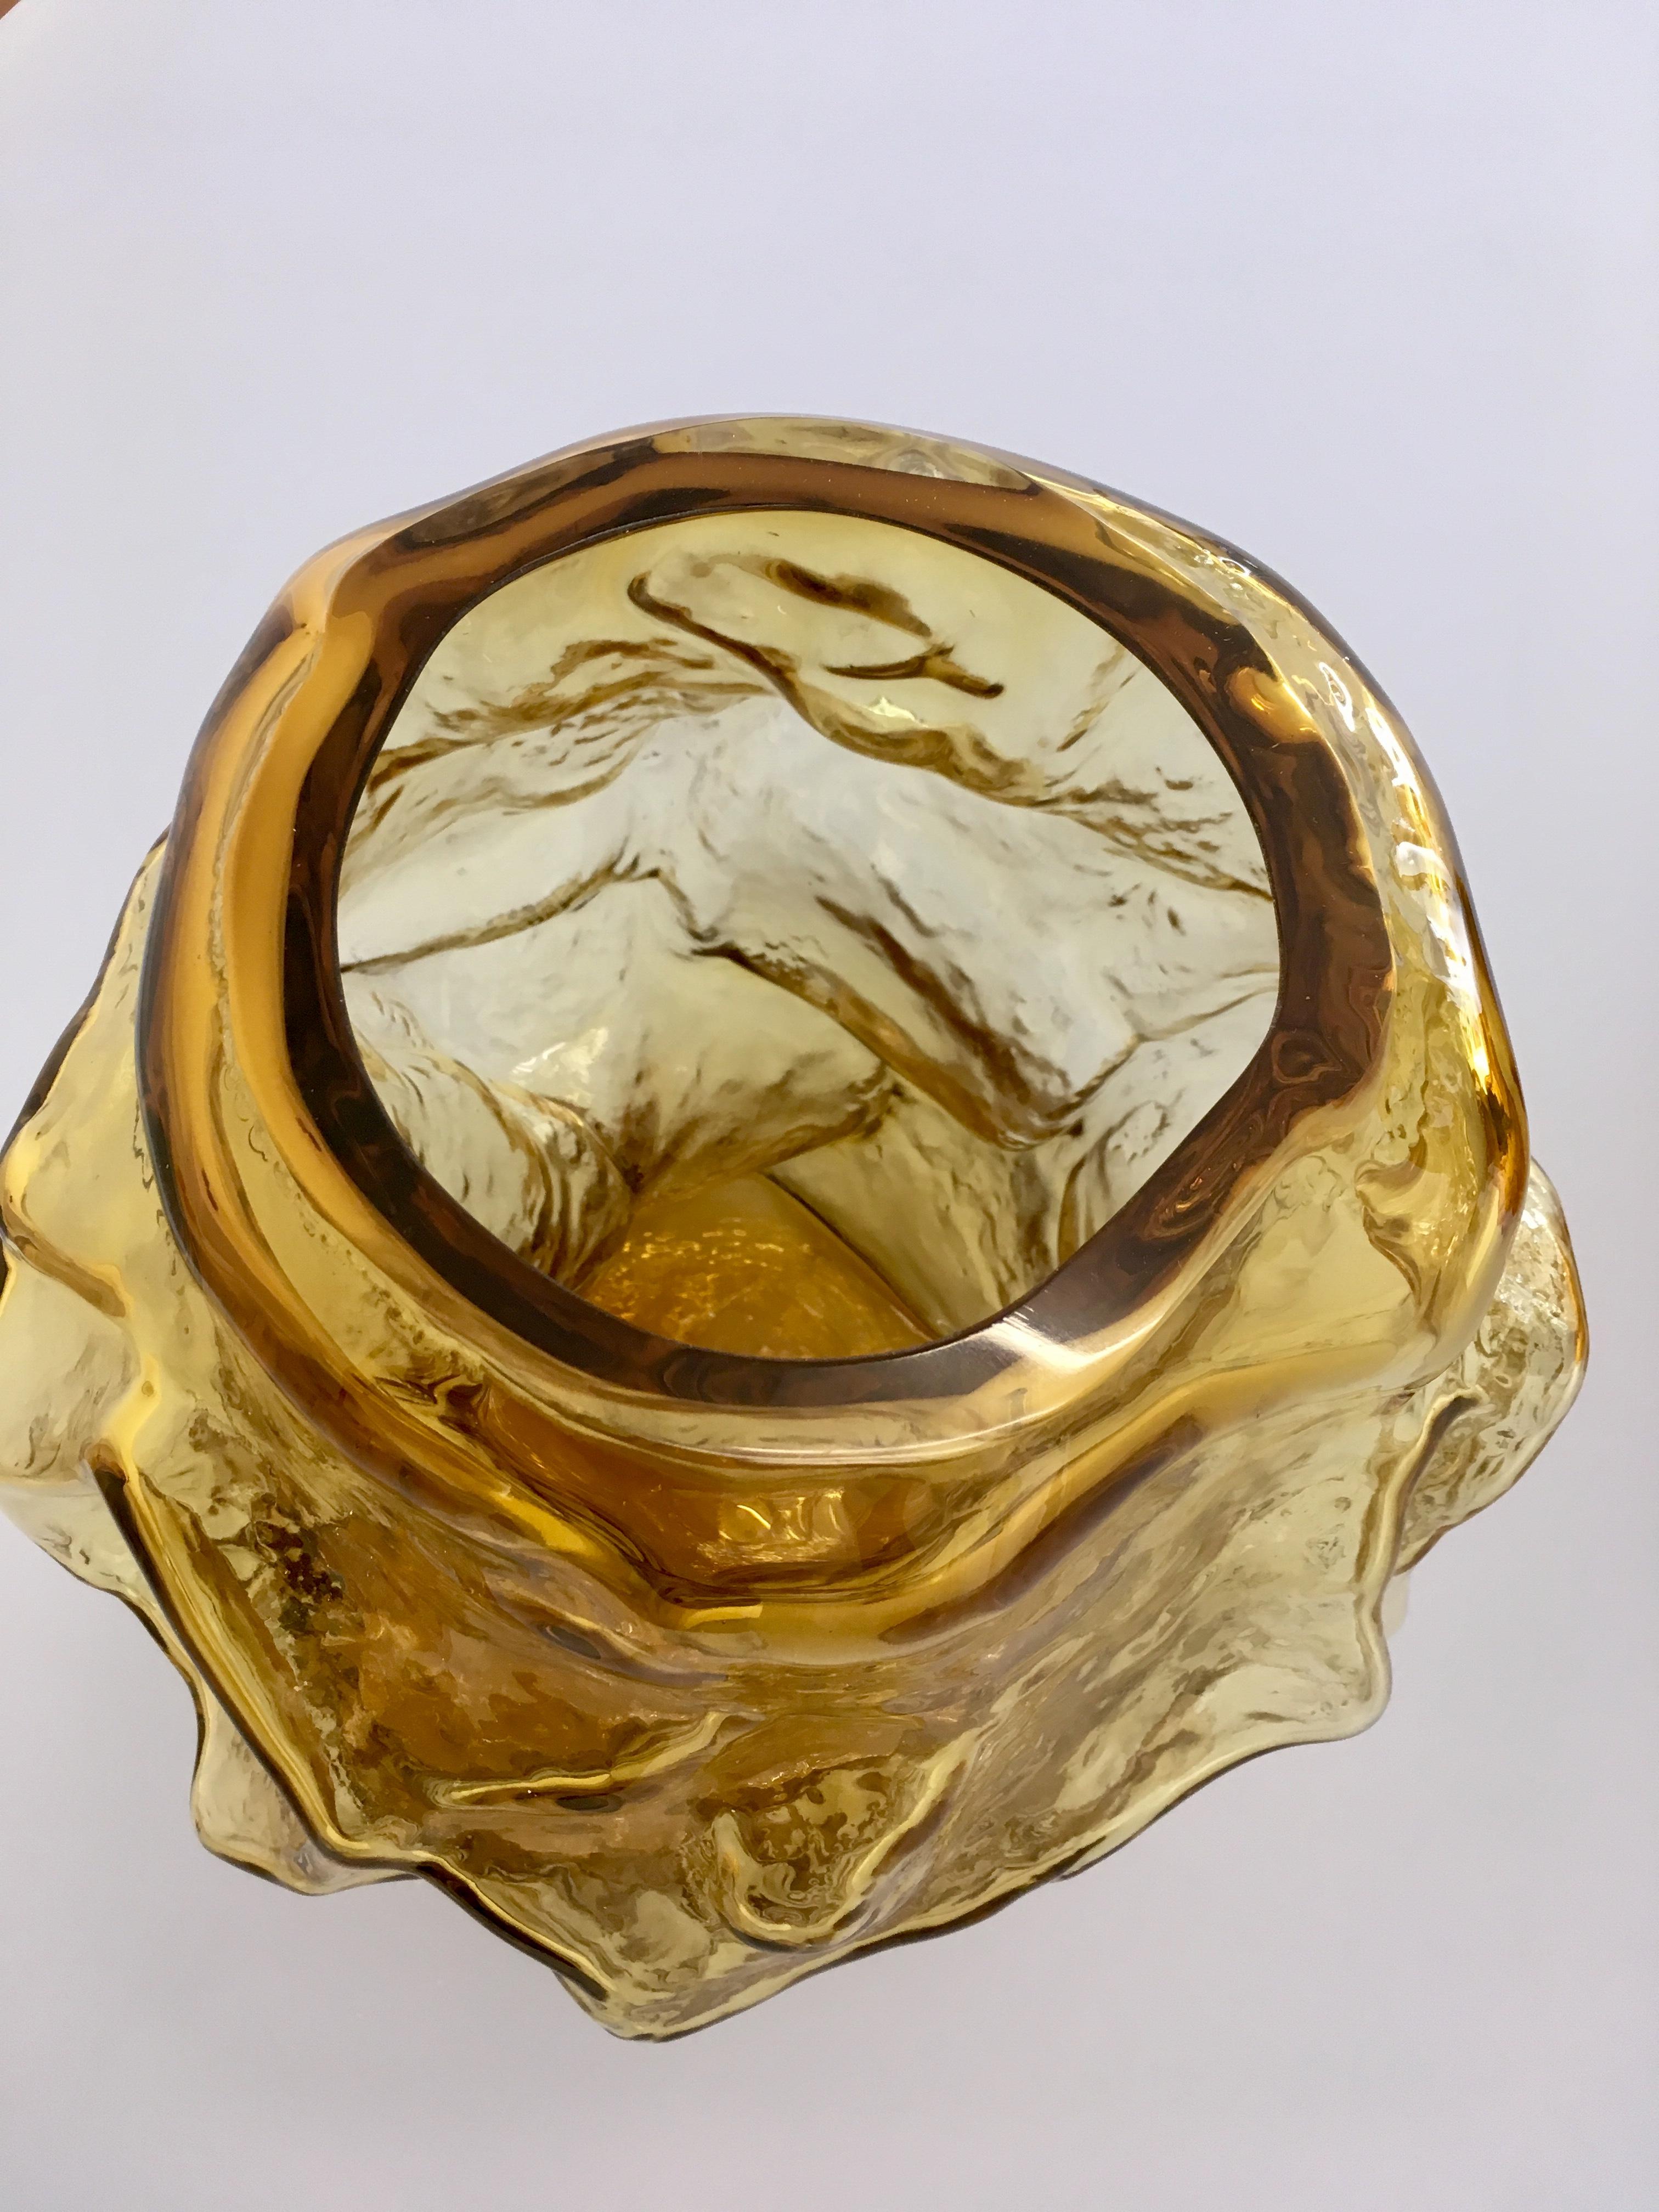 Post-Modern Contemporary Design Unique Glass 'Mountain' Vase by Fos, Cider